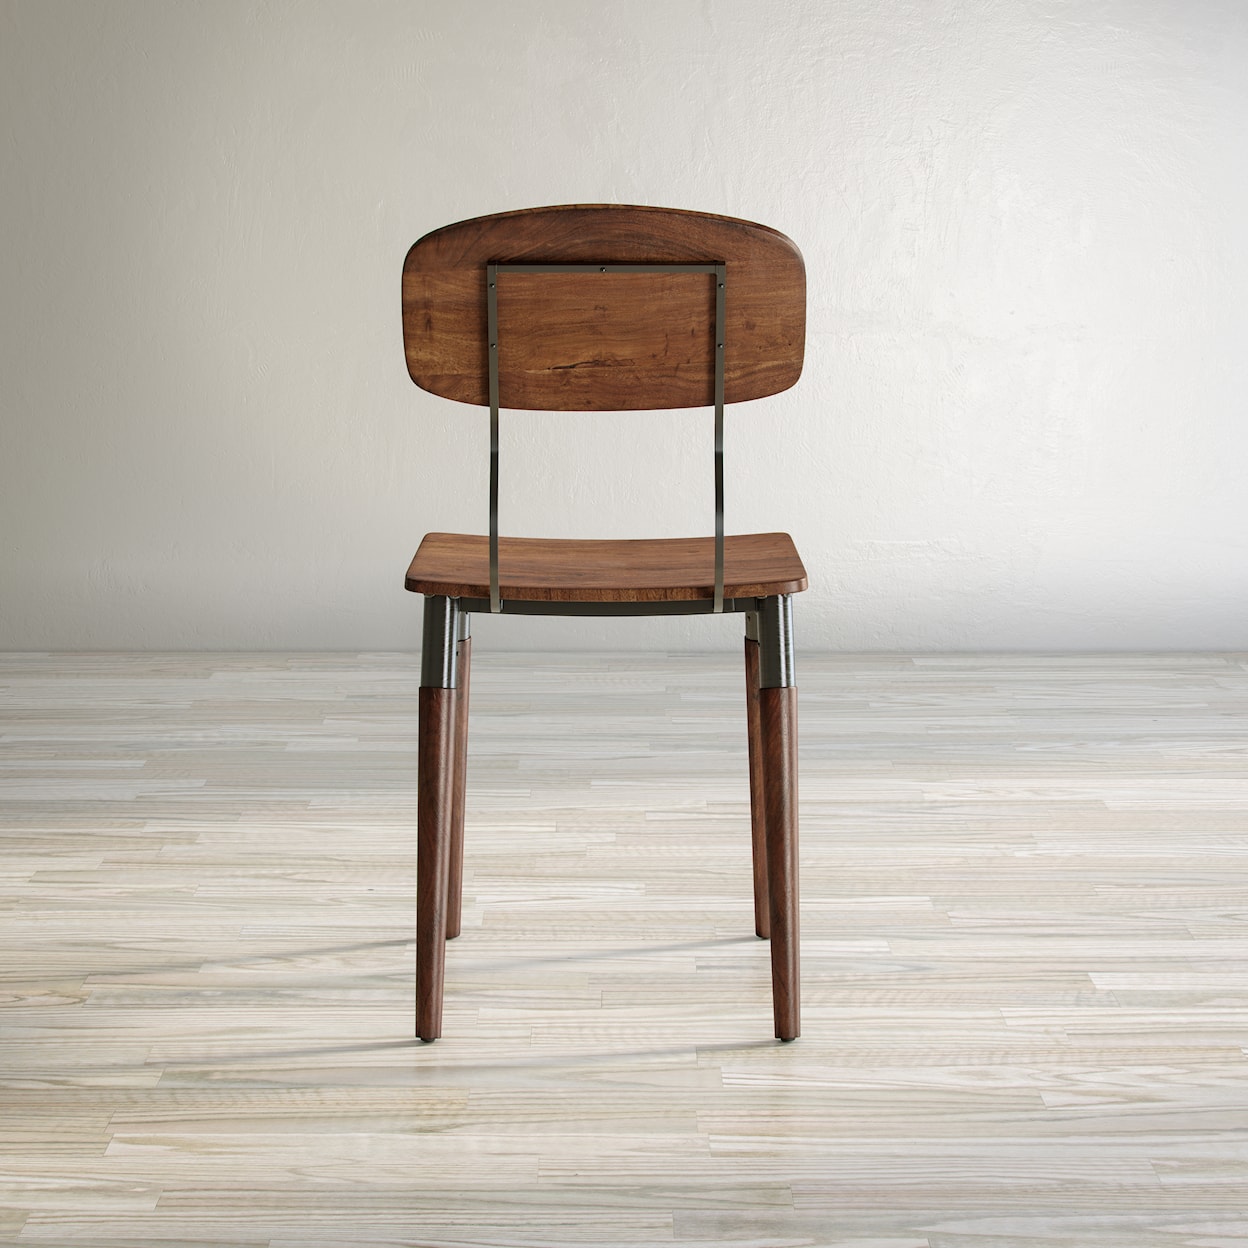 Jofran Nature's Edge Dining Chair